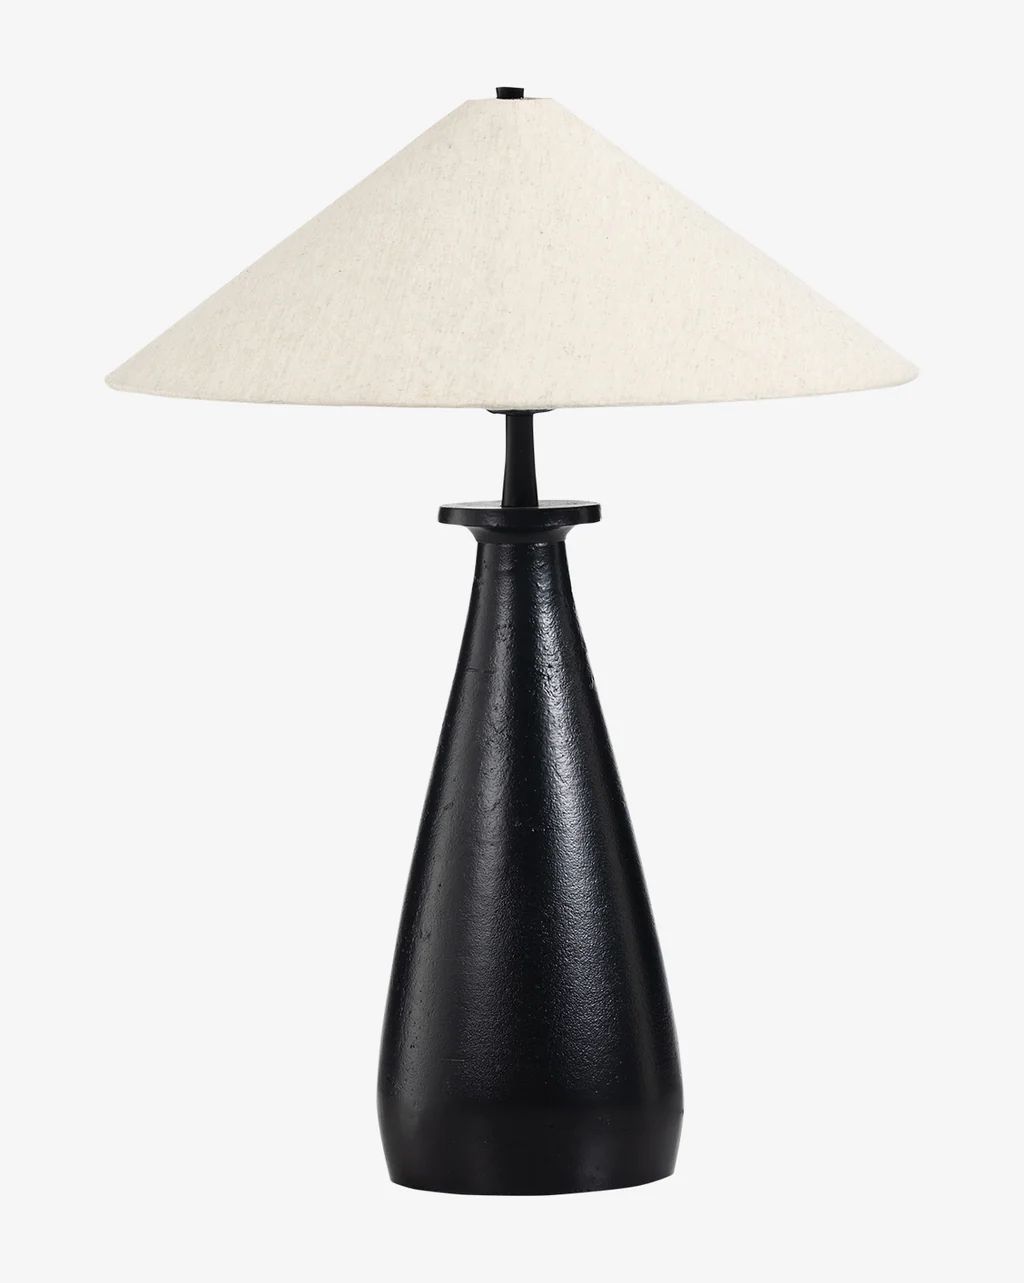 Innes Tapered Table Lamp | McGee & Co.